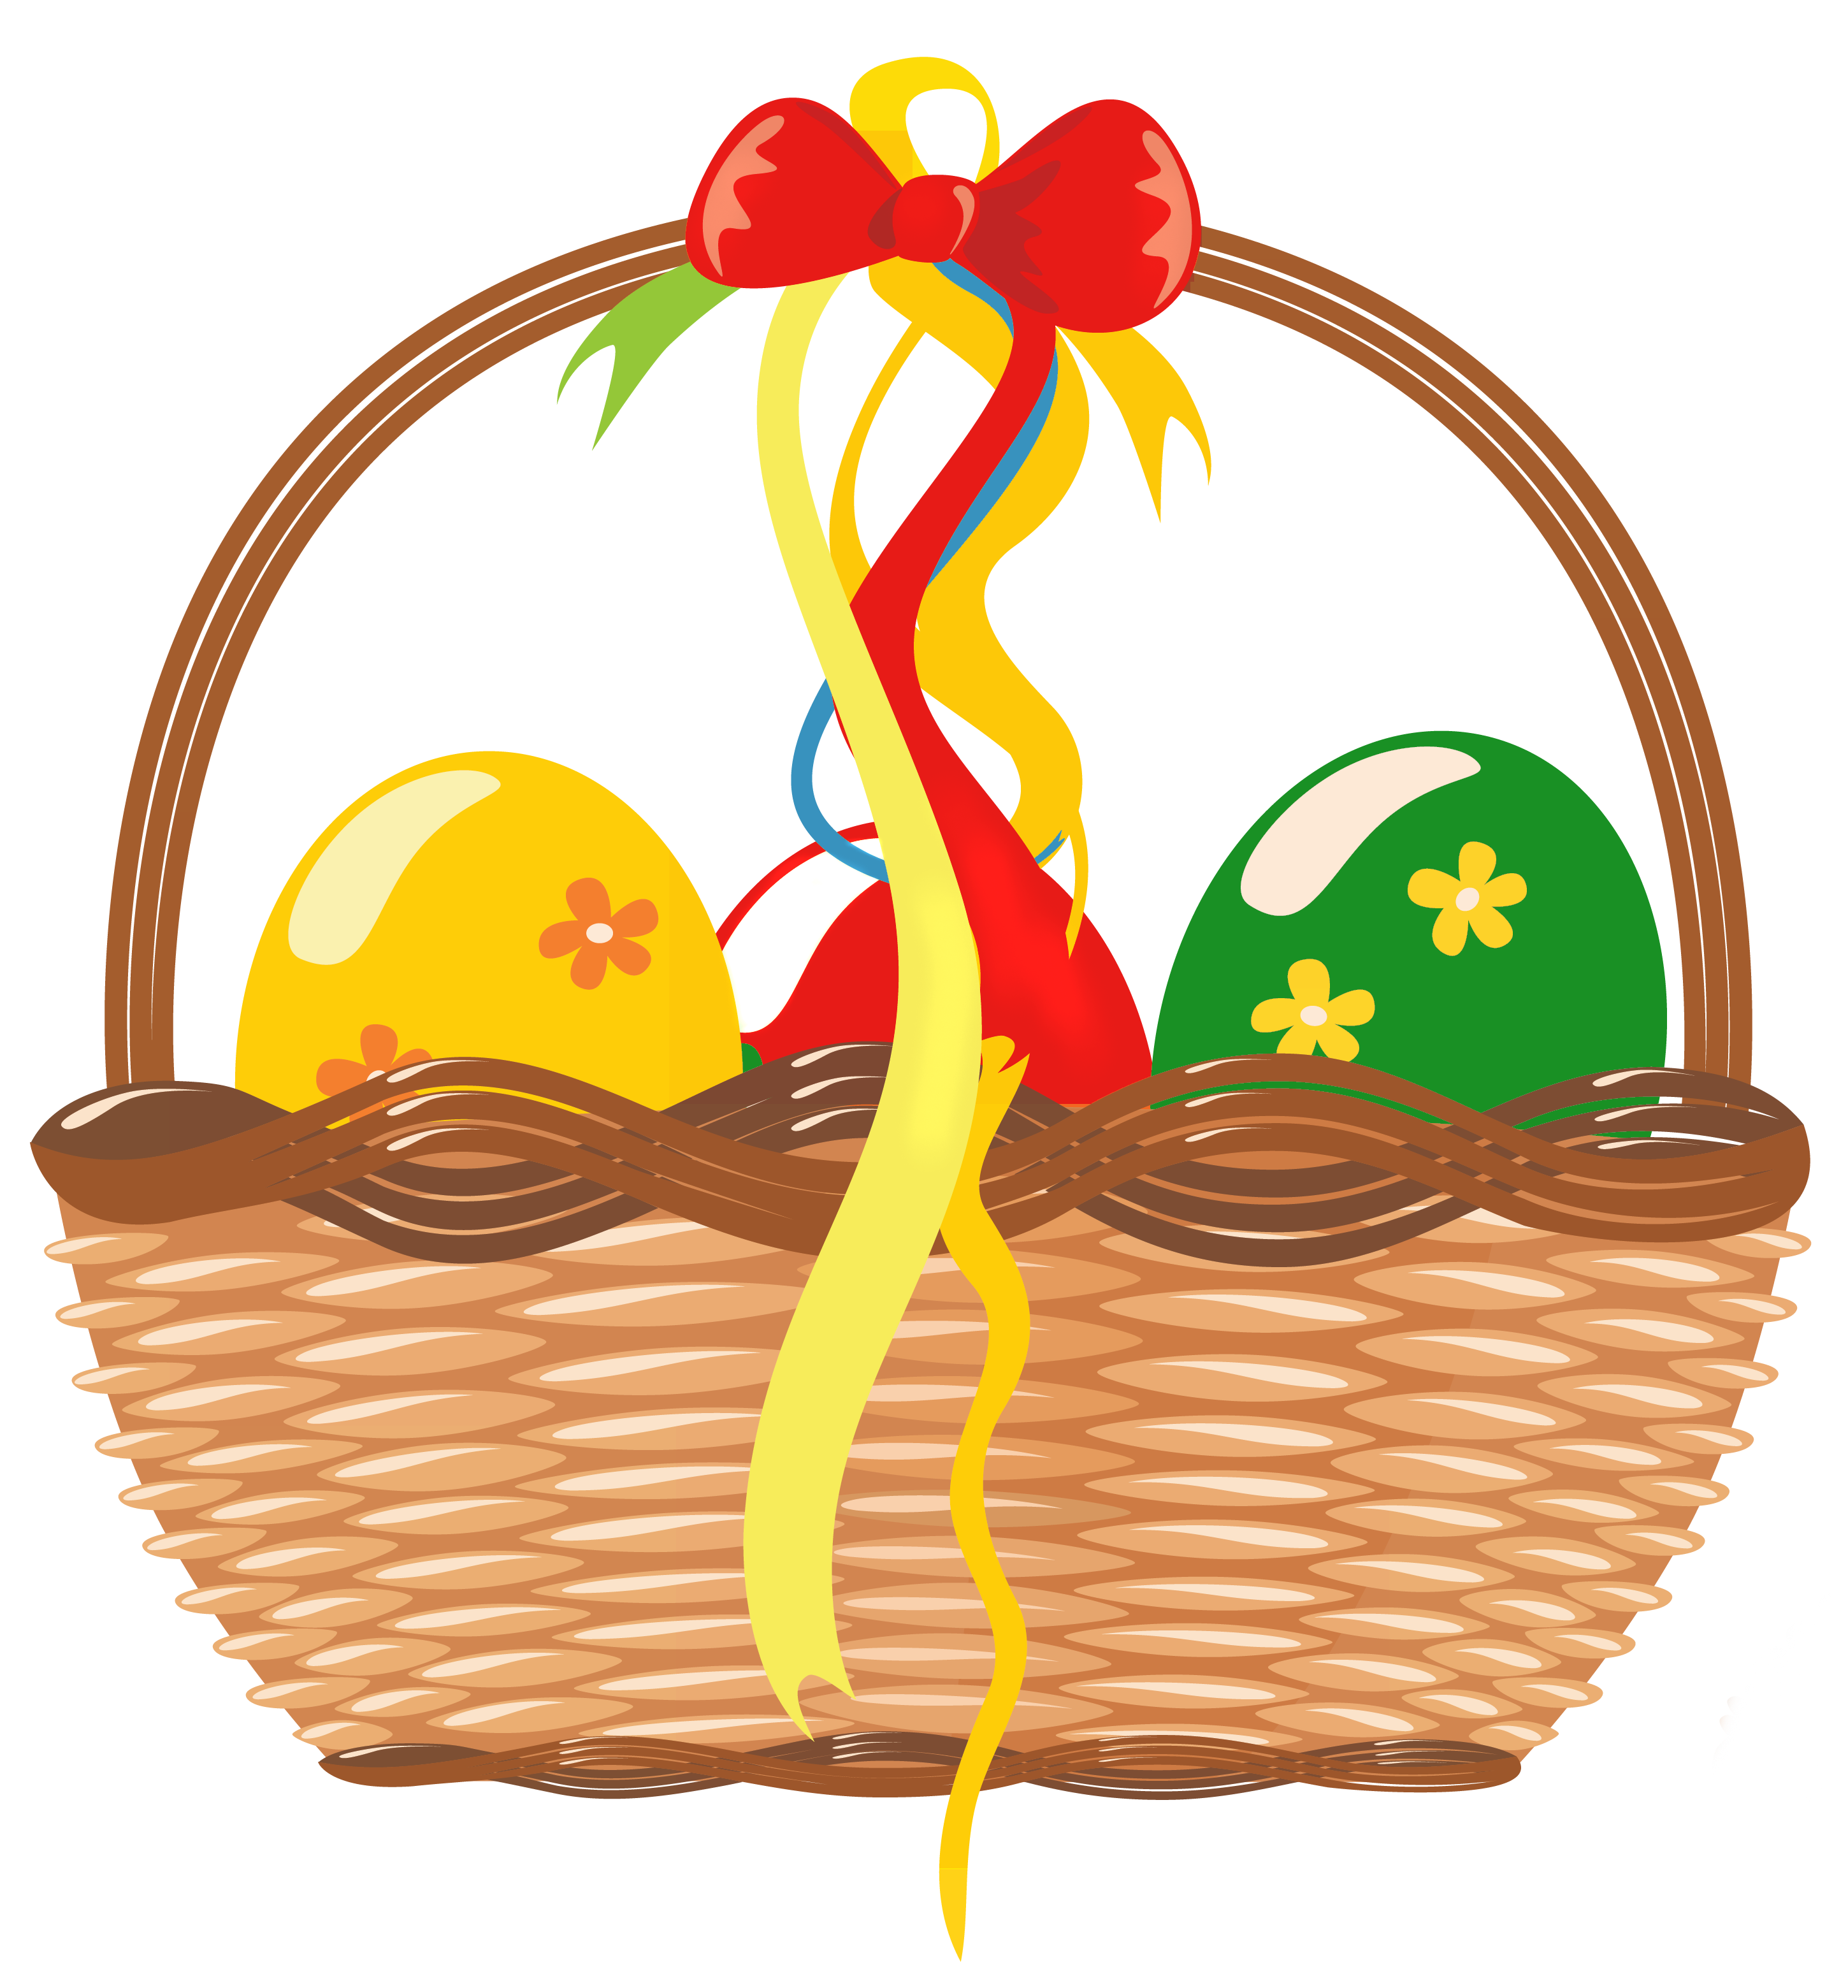 Easter Basket with Eggs PNG Clipart Picture - ClipArt Best ...